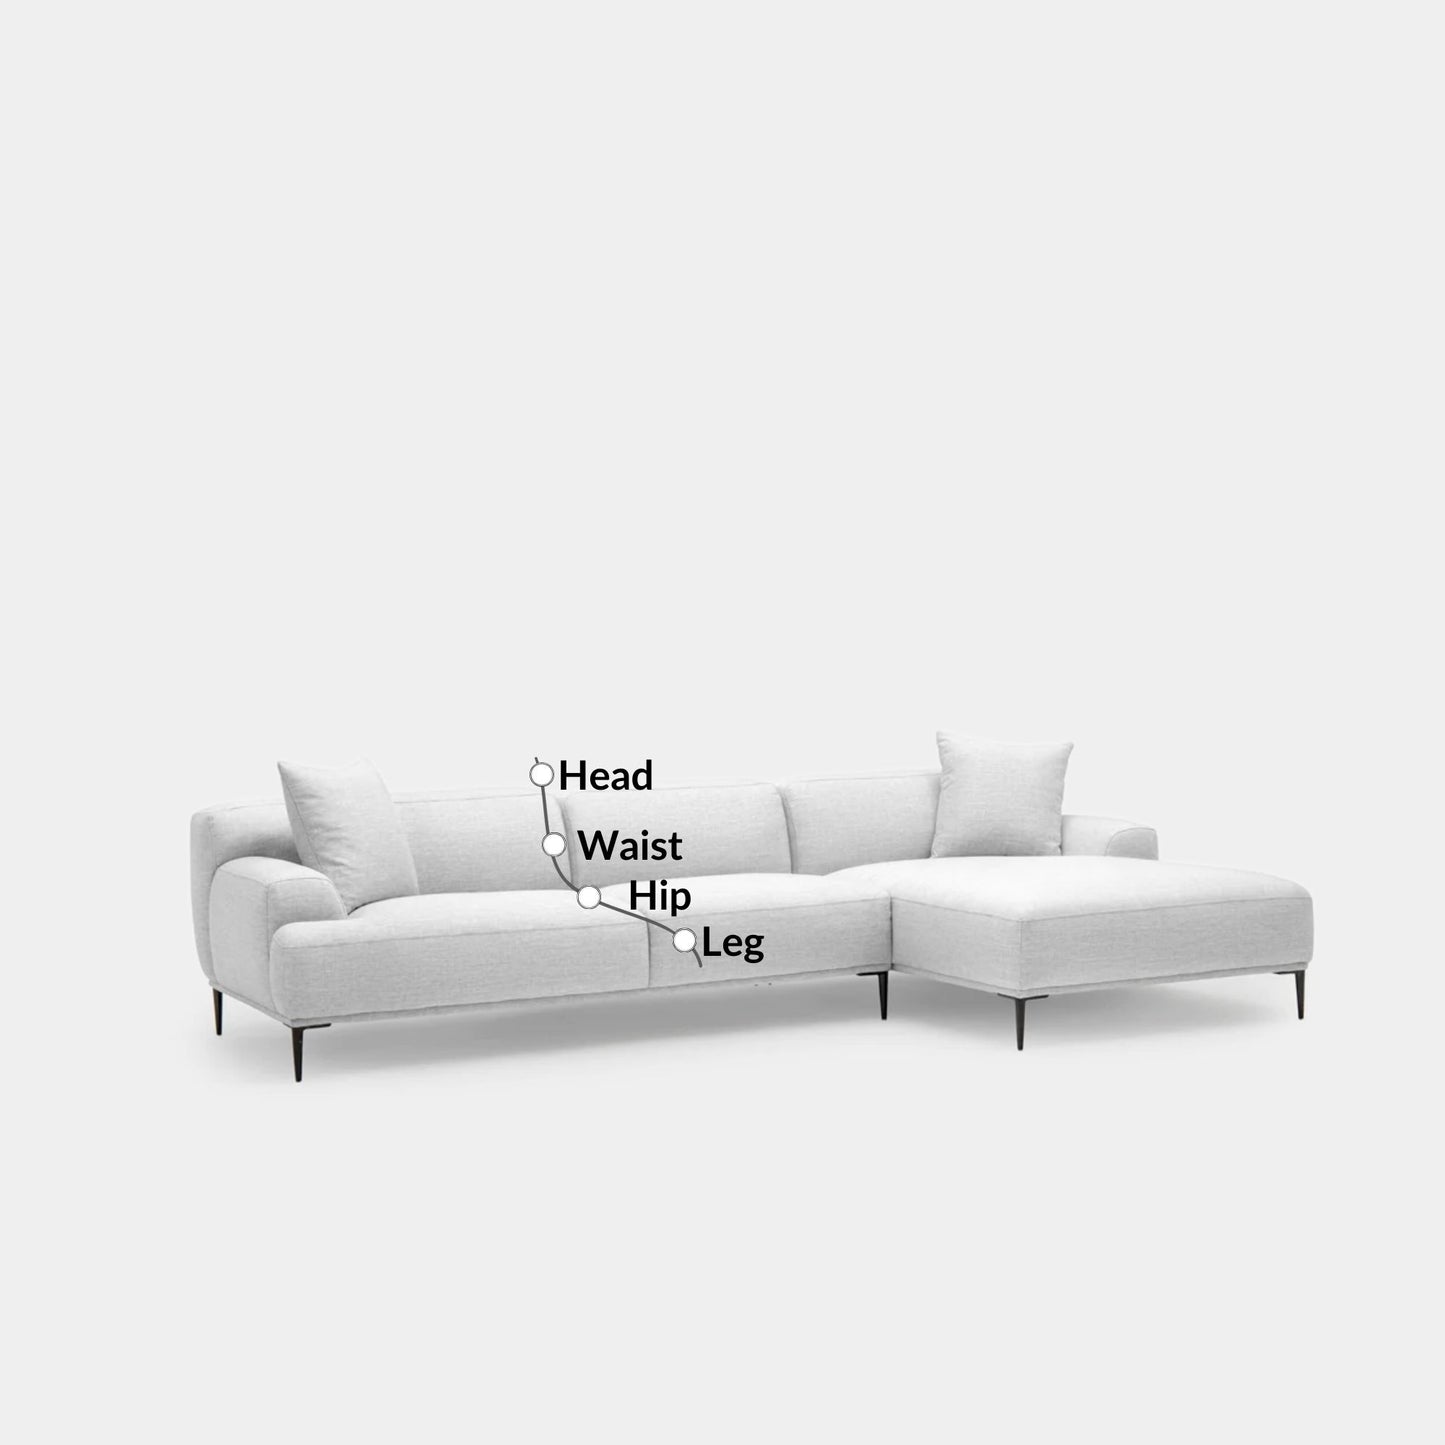 Crystal fabric sectional sofa large right grey